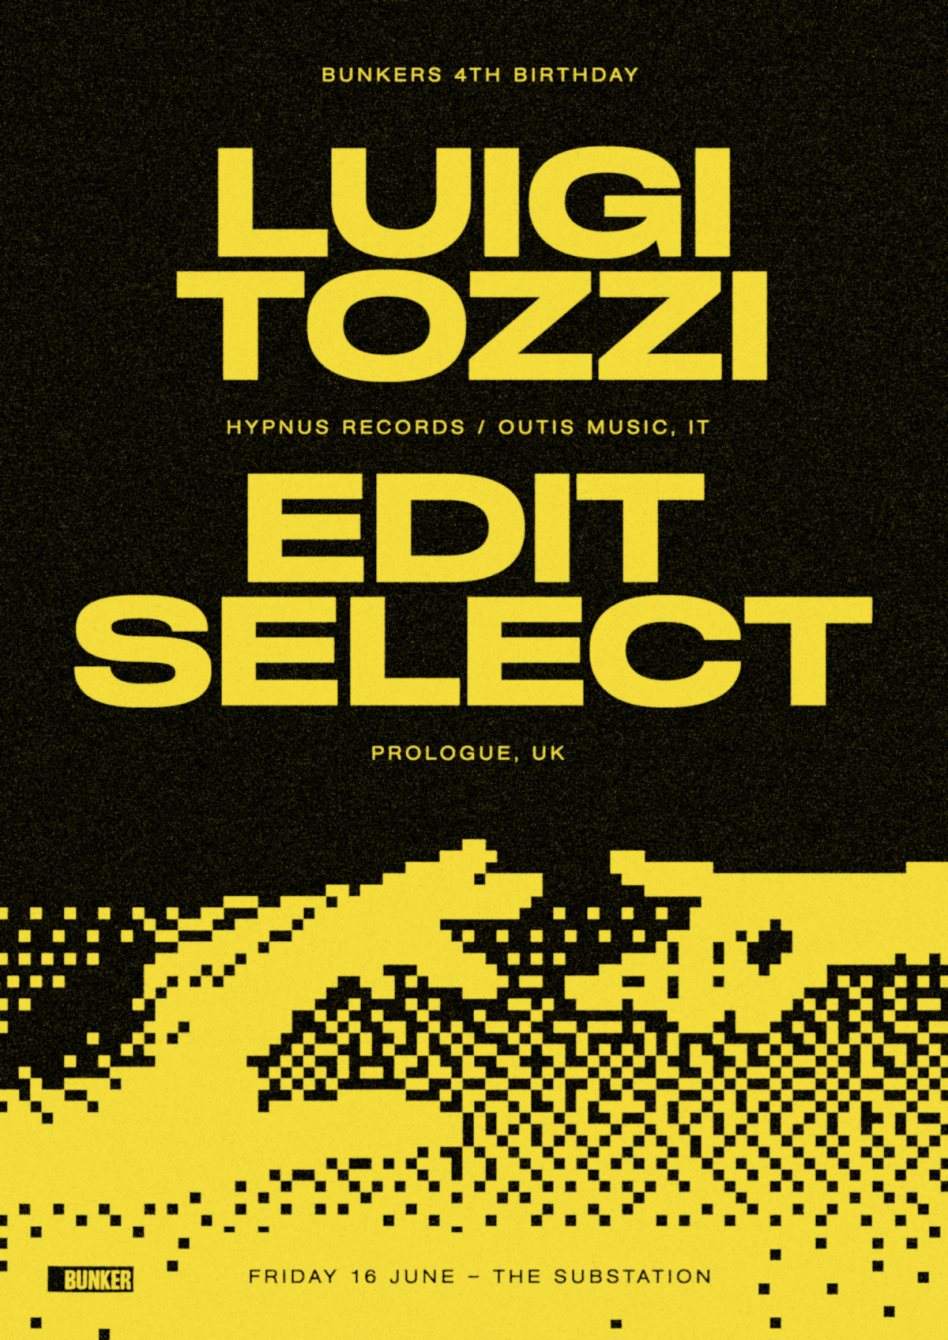 Bunkers 4th Birthday with Luigi Tozzi & Edit Select (Sold Out) - Página frontal